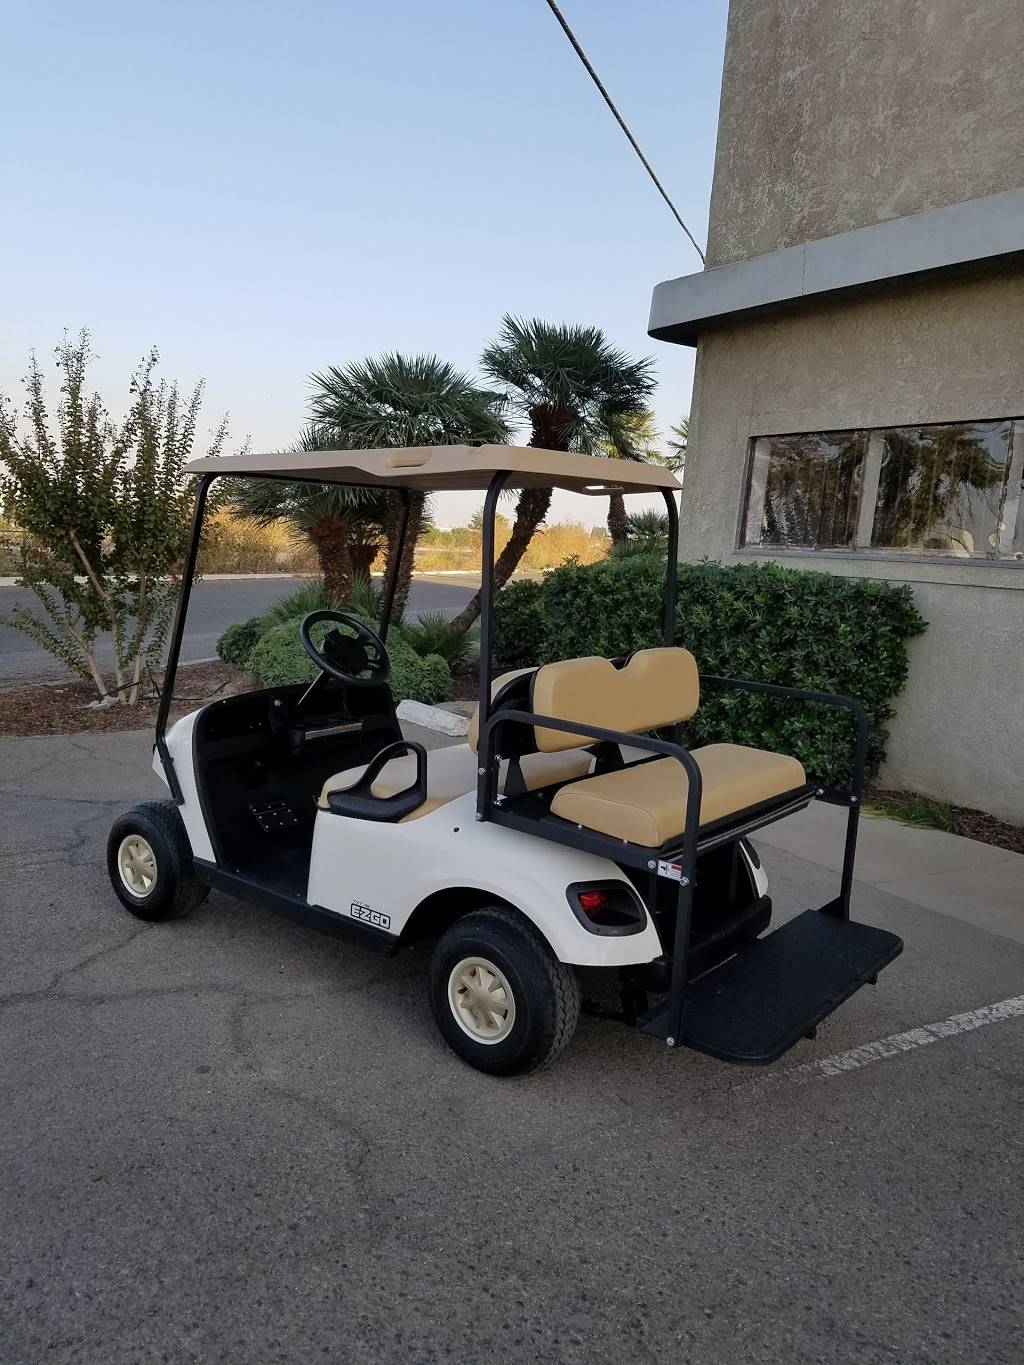 Tolleson Golf Cars Inc | 3363 S Golden State Blvd, Fresno, CA 93725 | Phone: (559) 497-6112